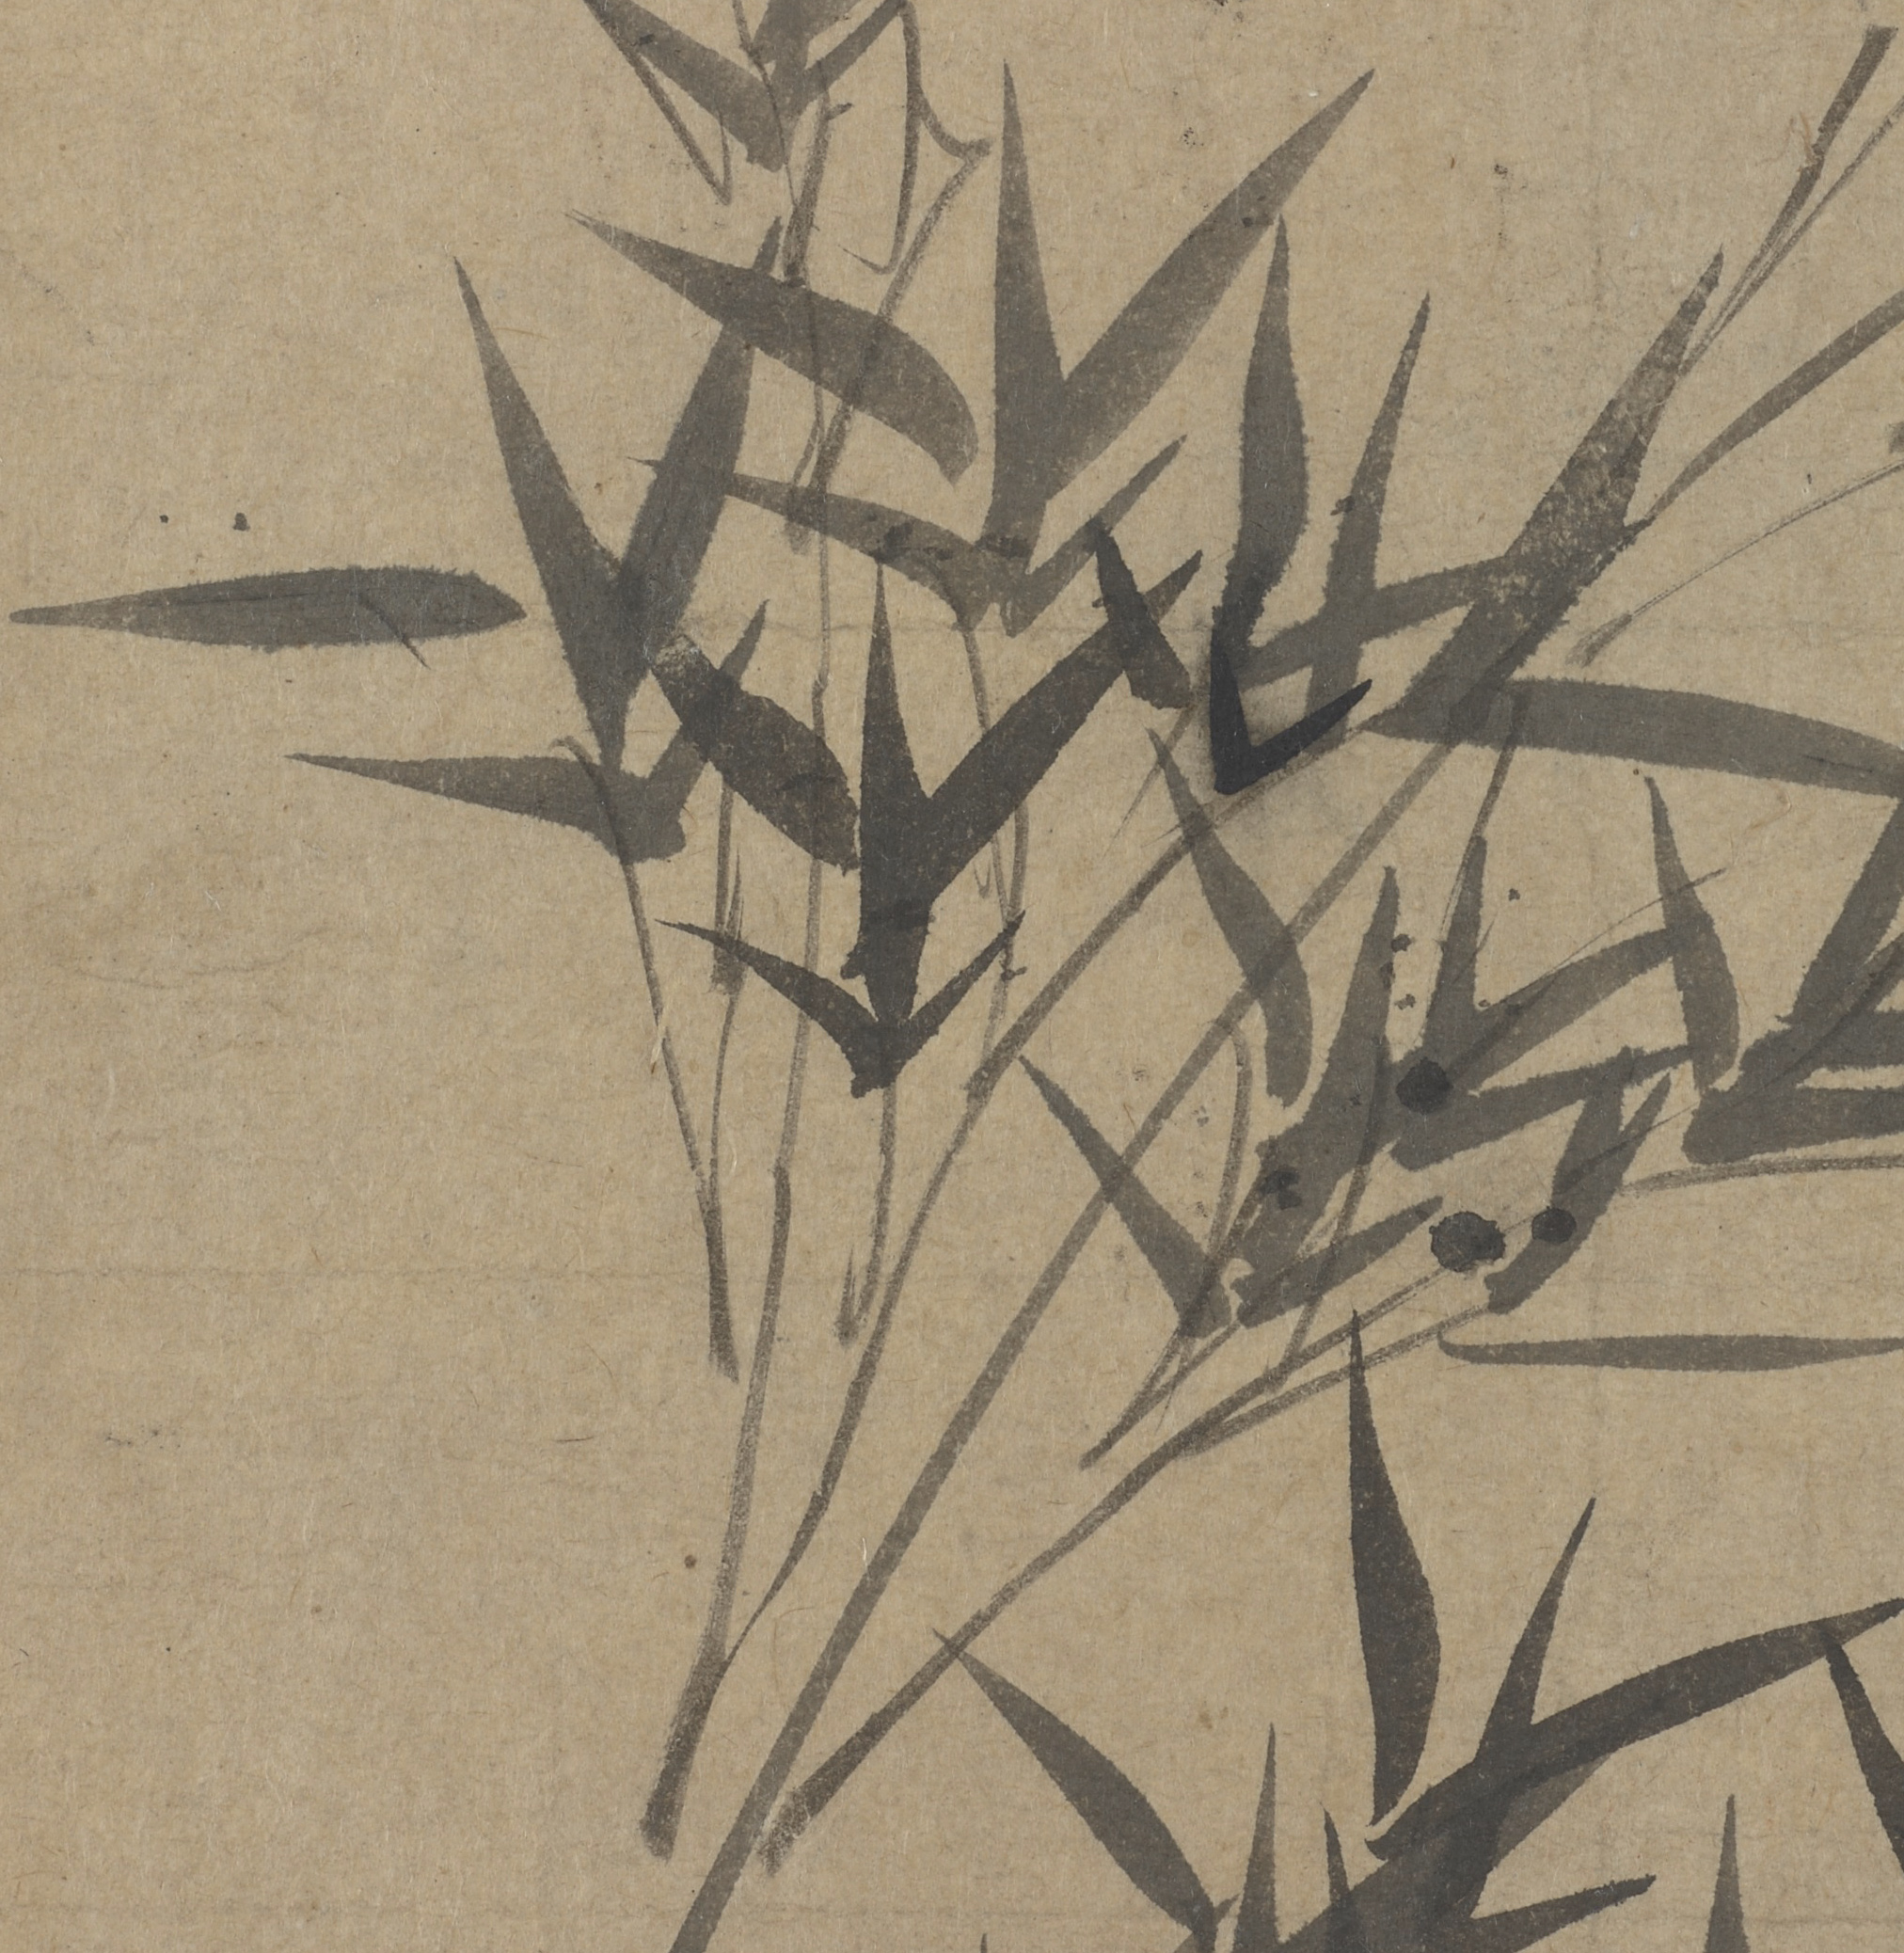 Ni Zan 倪瓚 (1306–1374), A Branch of Bamboo, Yuan or Ming dynasty, ca. 1369, Inscription by Qian Weishan (1341–c. 1379), ink on paper, China, 29.3 x 29 cm (Freer Gallery of Art, Smithsonian Institution, Washington, DC: Gift of Charles Lang Freer, F1915.36d)